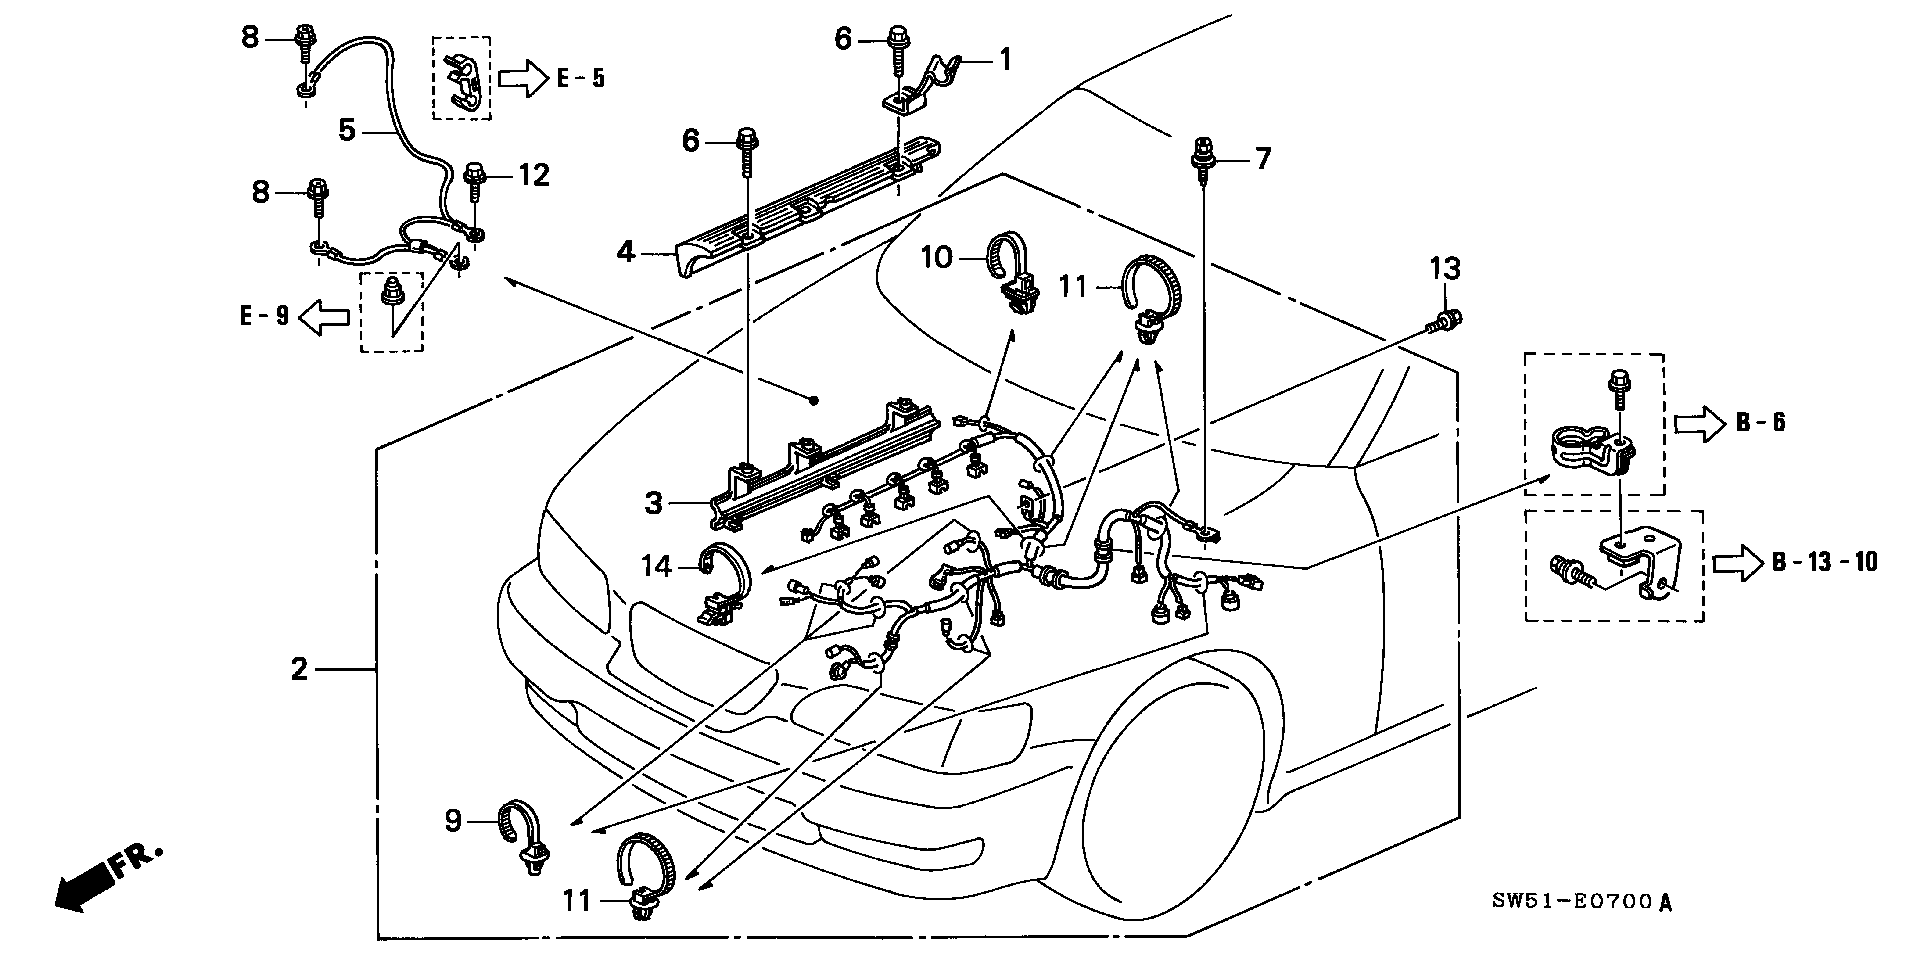 ENGINE WIRE HARNESS(L5)